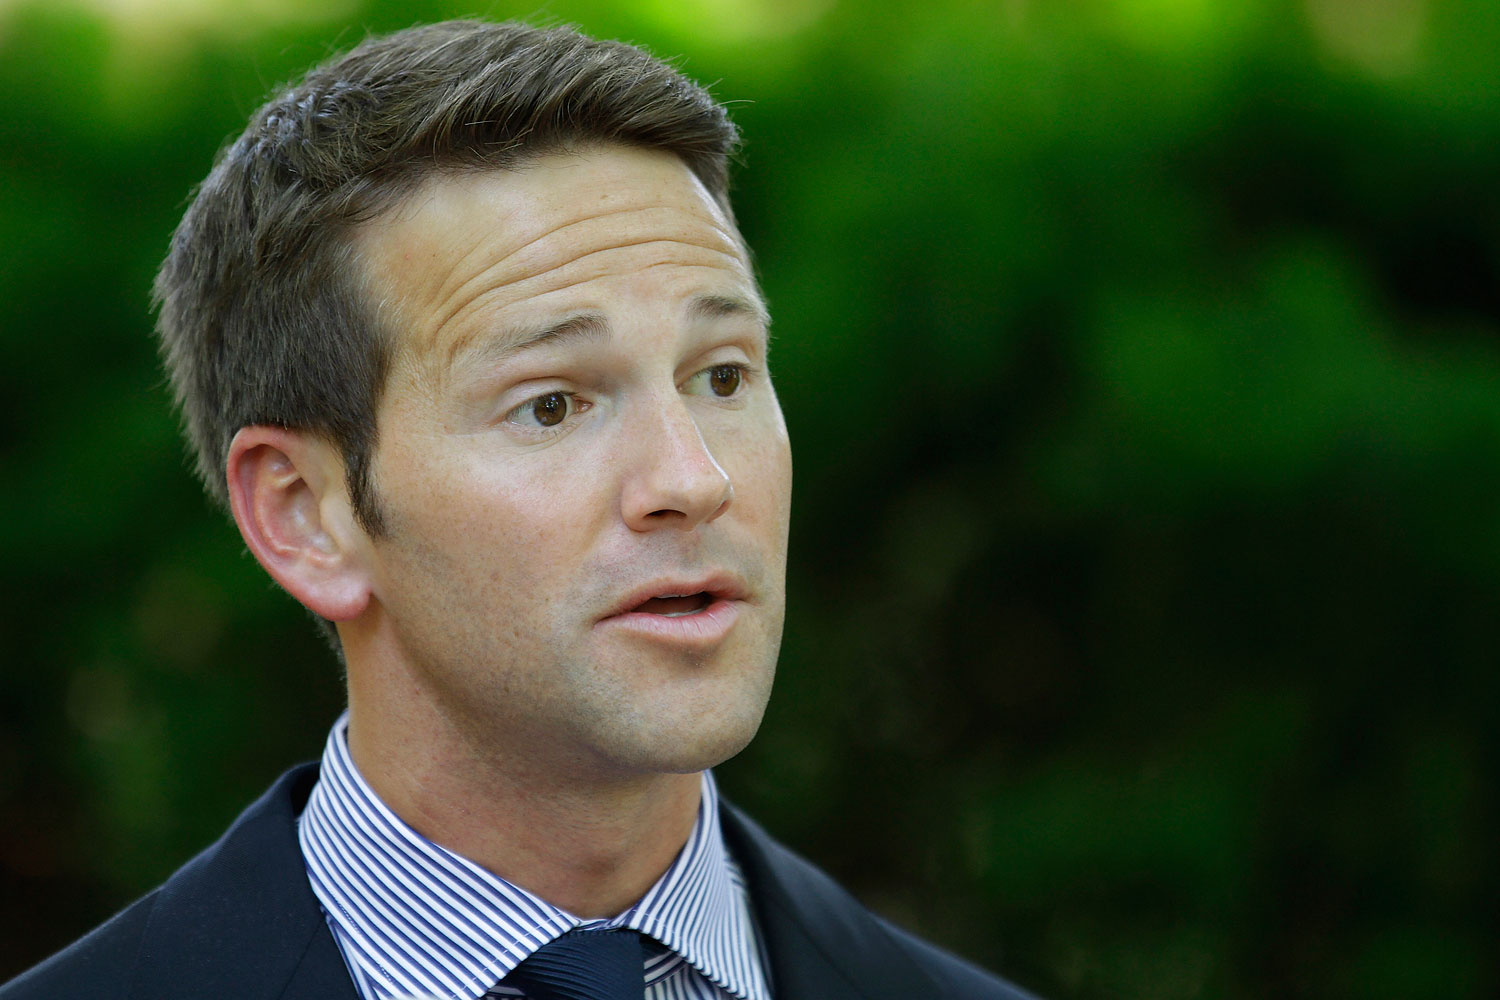 Rep. Aaron Schock, R-Ill, is seen speaking at the Illinois Governor's Mansion Thursday, June 14, 2012  Springfield, Ill. (Seth Perlman&mdash;AP)